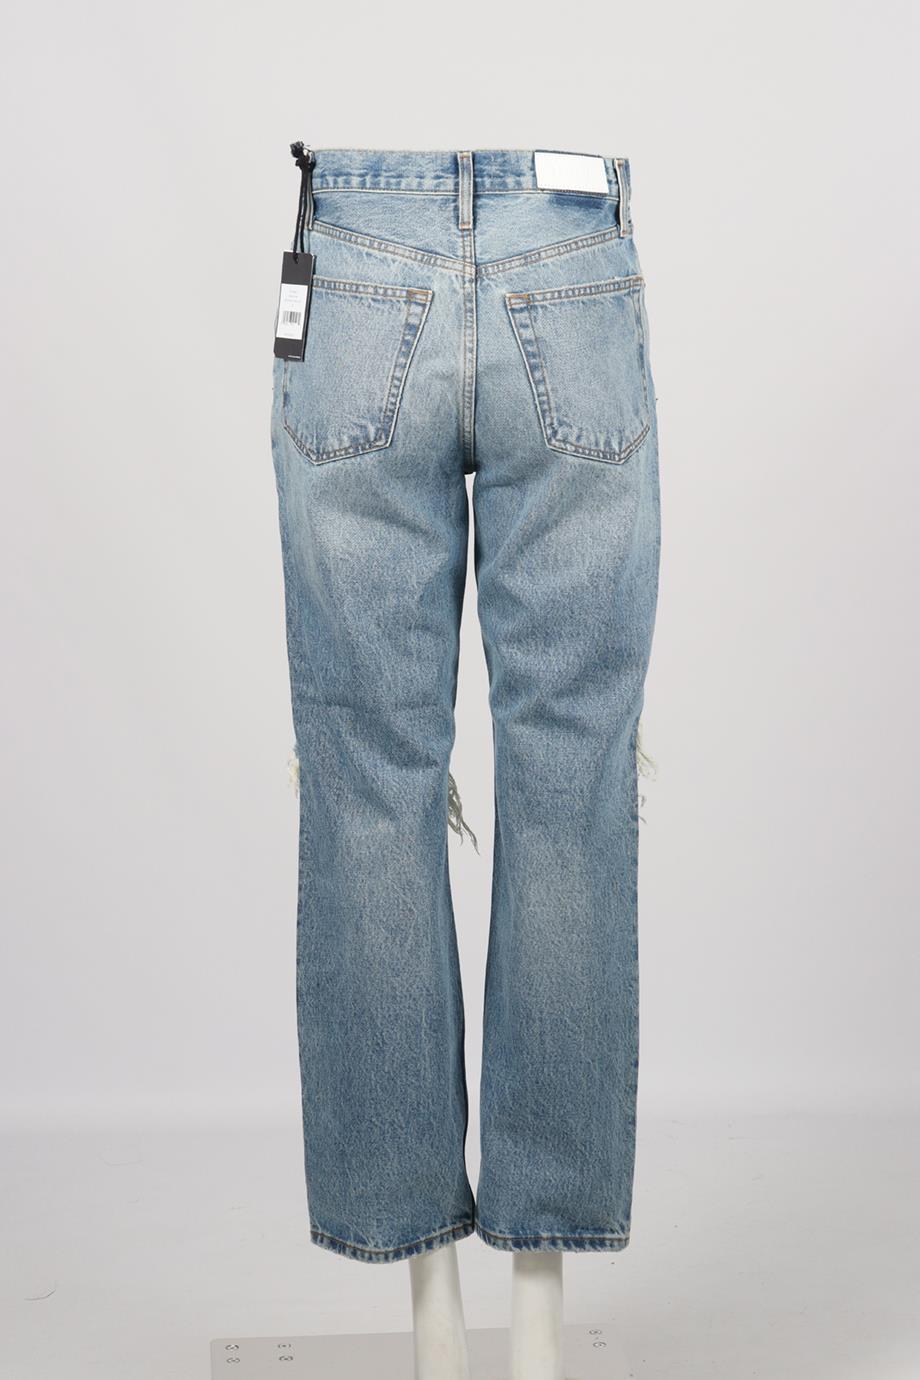 RE/DONE DISTRESSED STRAIGHT LEG JEANS W25 UK 6-8